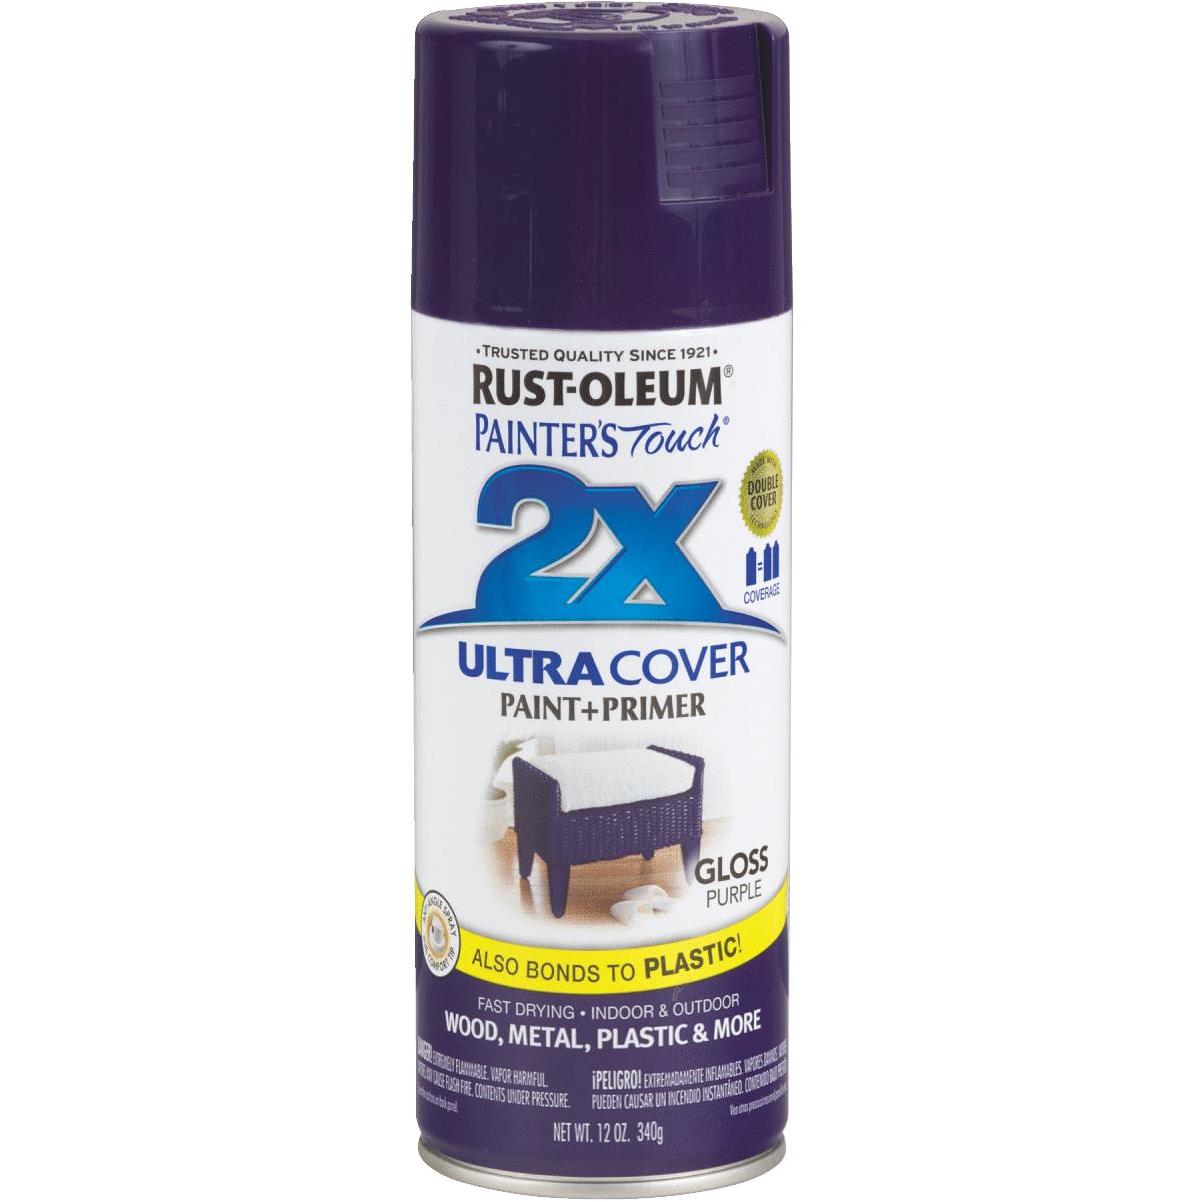 Rust-Oleum Painter's Touch 2X Ultra Cover 12 Oz. Gloss Paint +